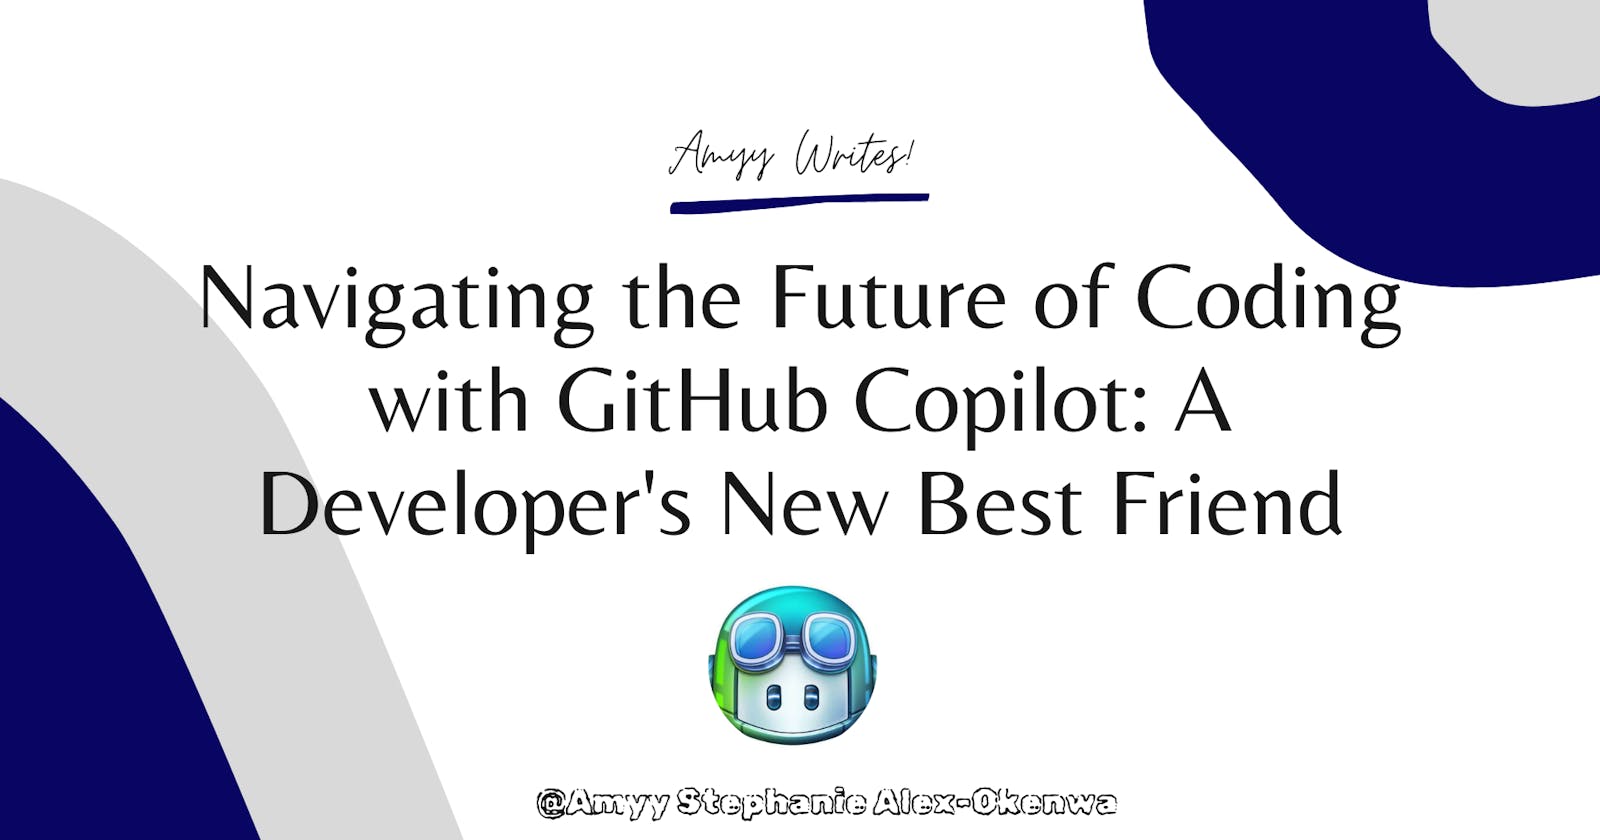 Navigating the Future of Coding with GitHub Copilot: A Developer's New Best Friend